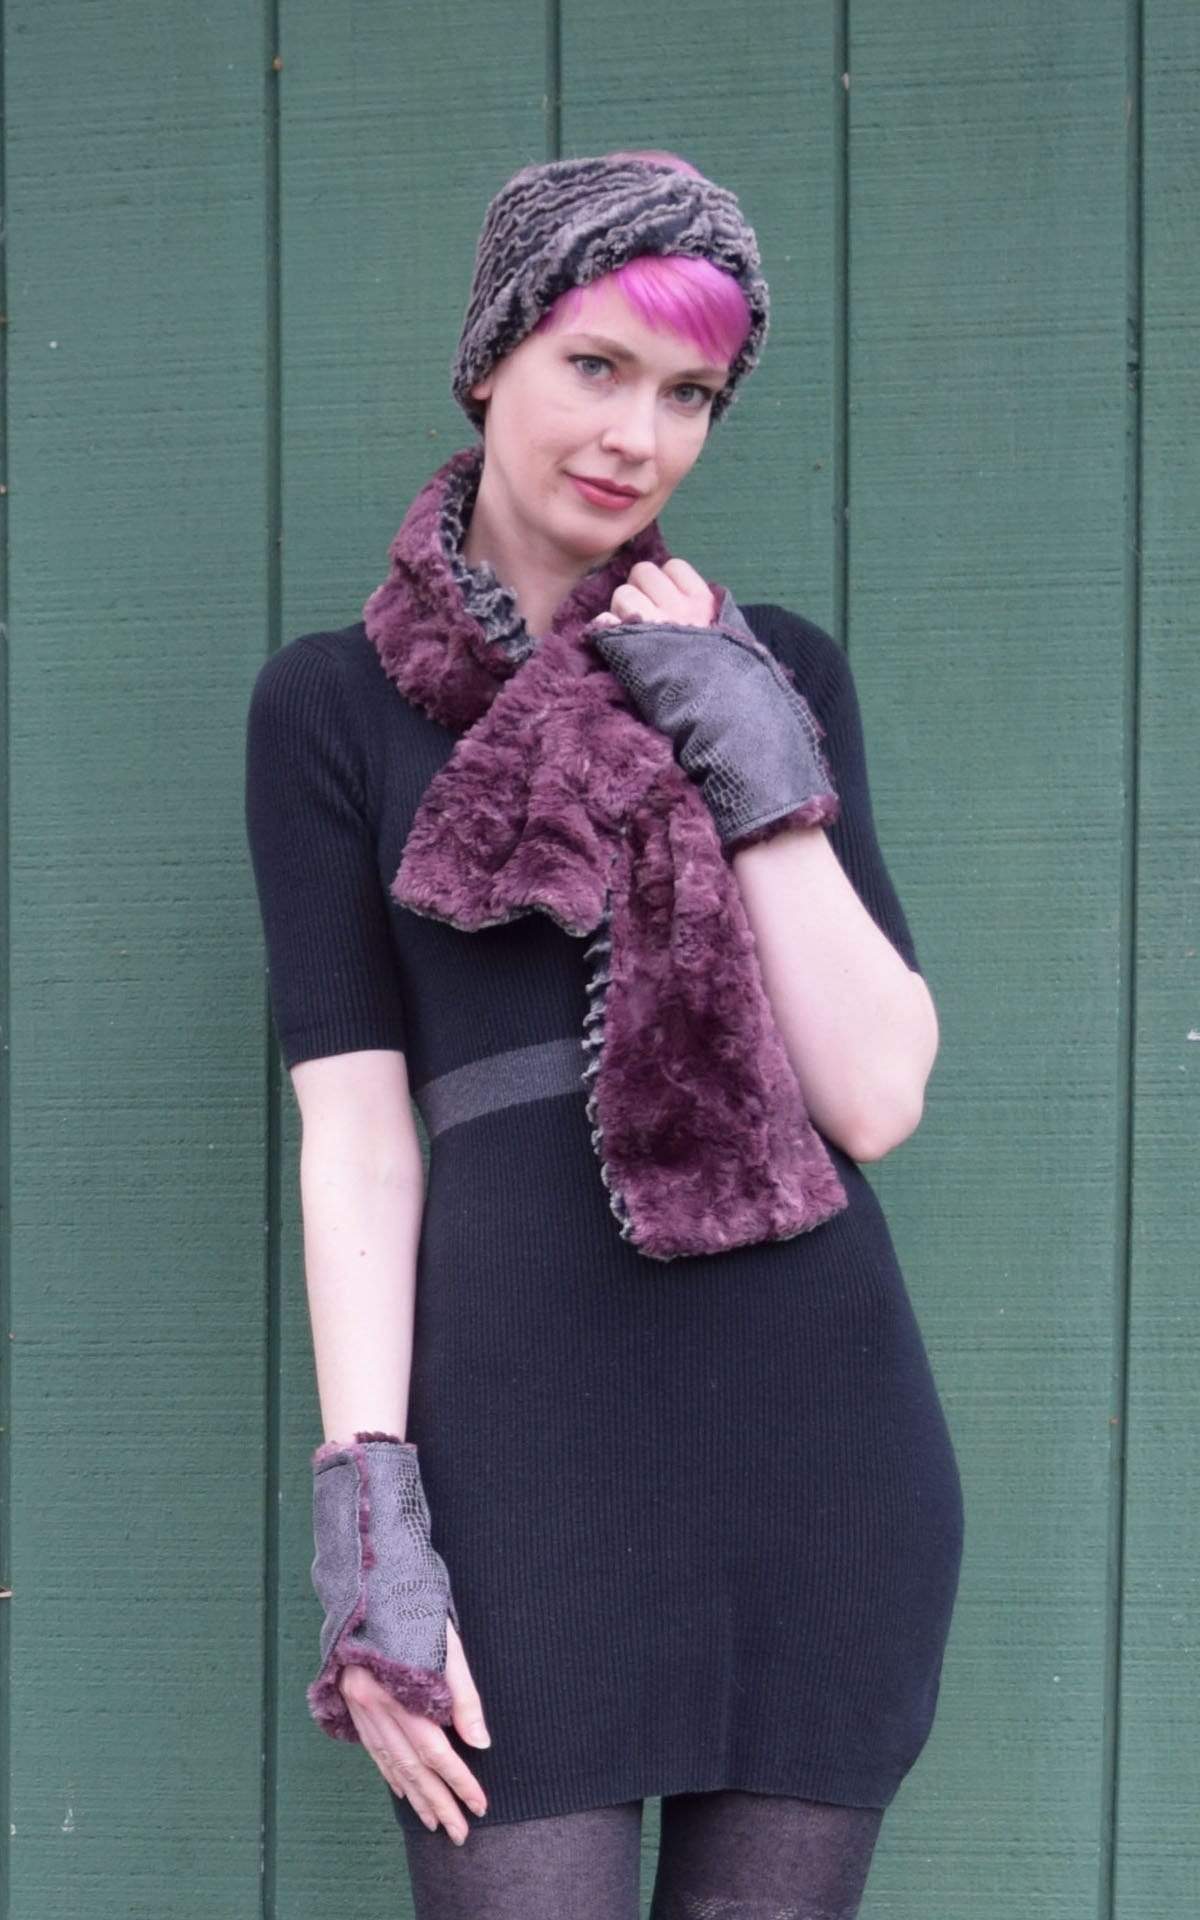 Model l wearing fingerless texting gloves, headband, and matching  reversible Long Pull Through Scarf | Deseret Sand in Charcoal gray with Highland in Thistle faux fur, Mauve tie-dye, and grey | Handmade in Seattle WA | Pandemonium Millinery